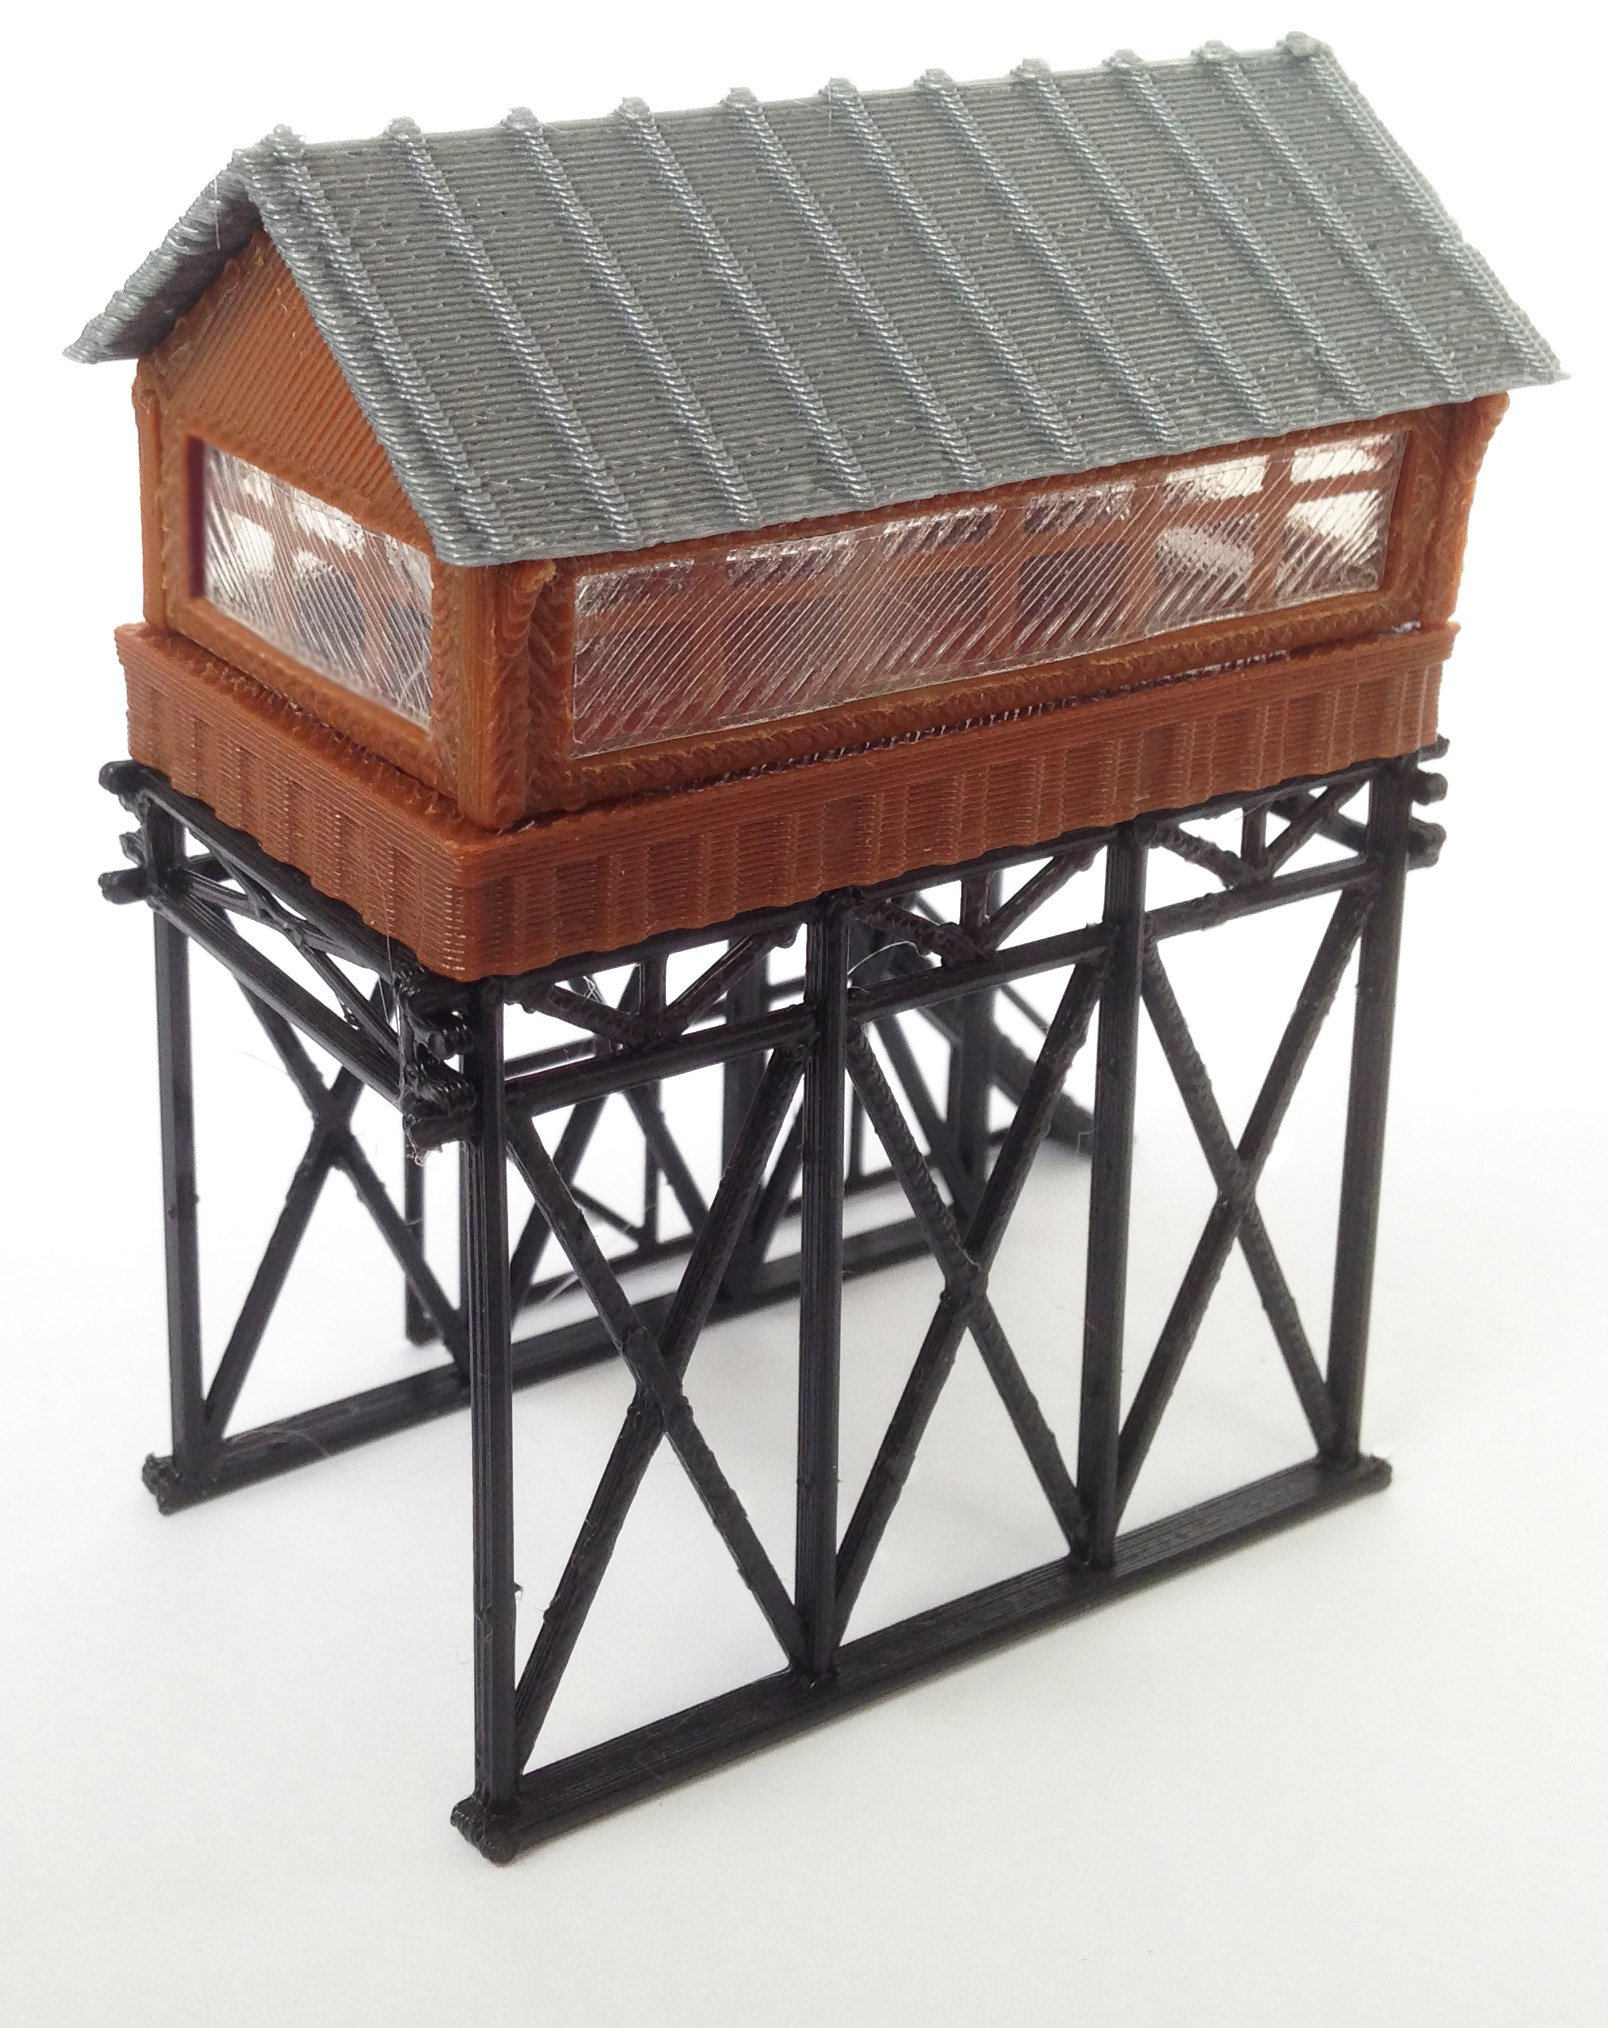 Outland Models Train Railway Layout Station Overhead Signal Box/Tower N Scale